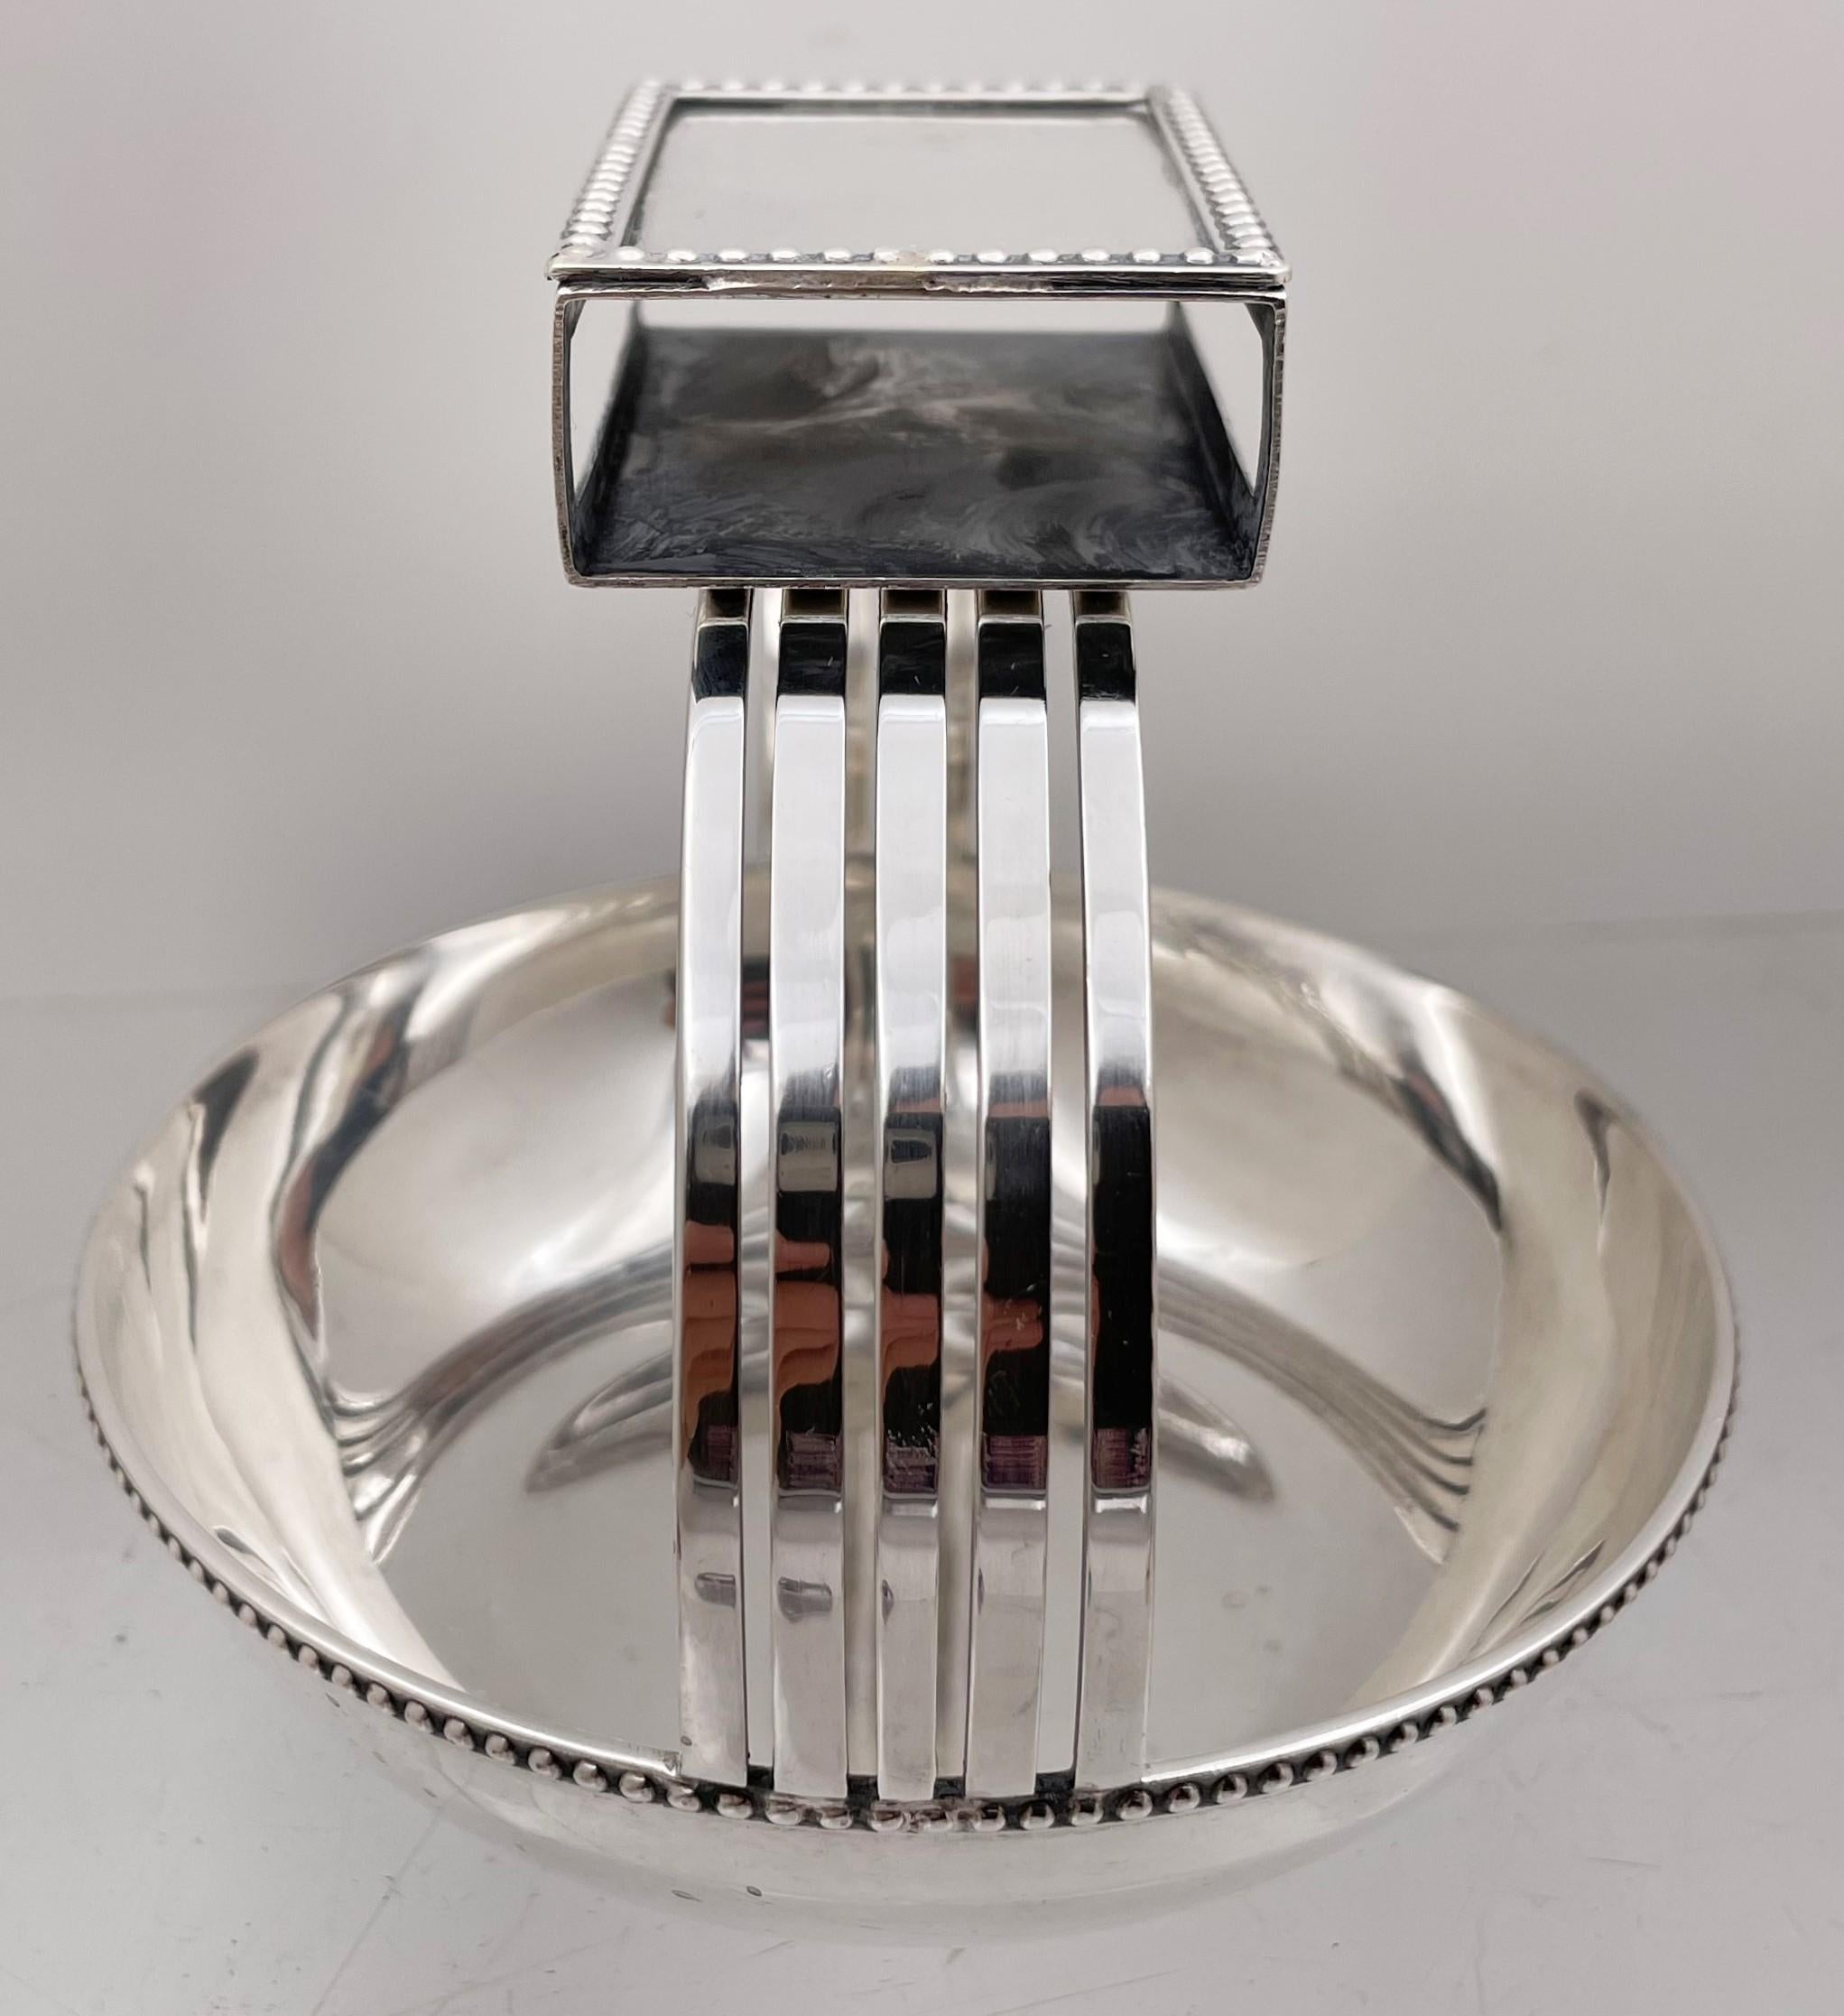 Faraone, Italian silver ashtray with an integrated matchbox on top in Mid-Century Modern style, with an elegant, geometric design. The matchbox can be detached from the ashtray. It measures 4 1/2'' in height (height of the ashtray is 1 1/4'') by 4